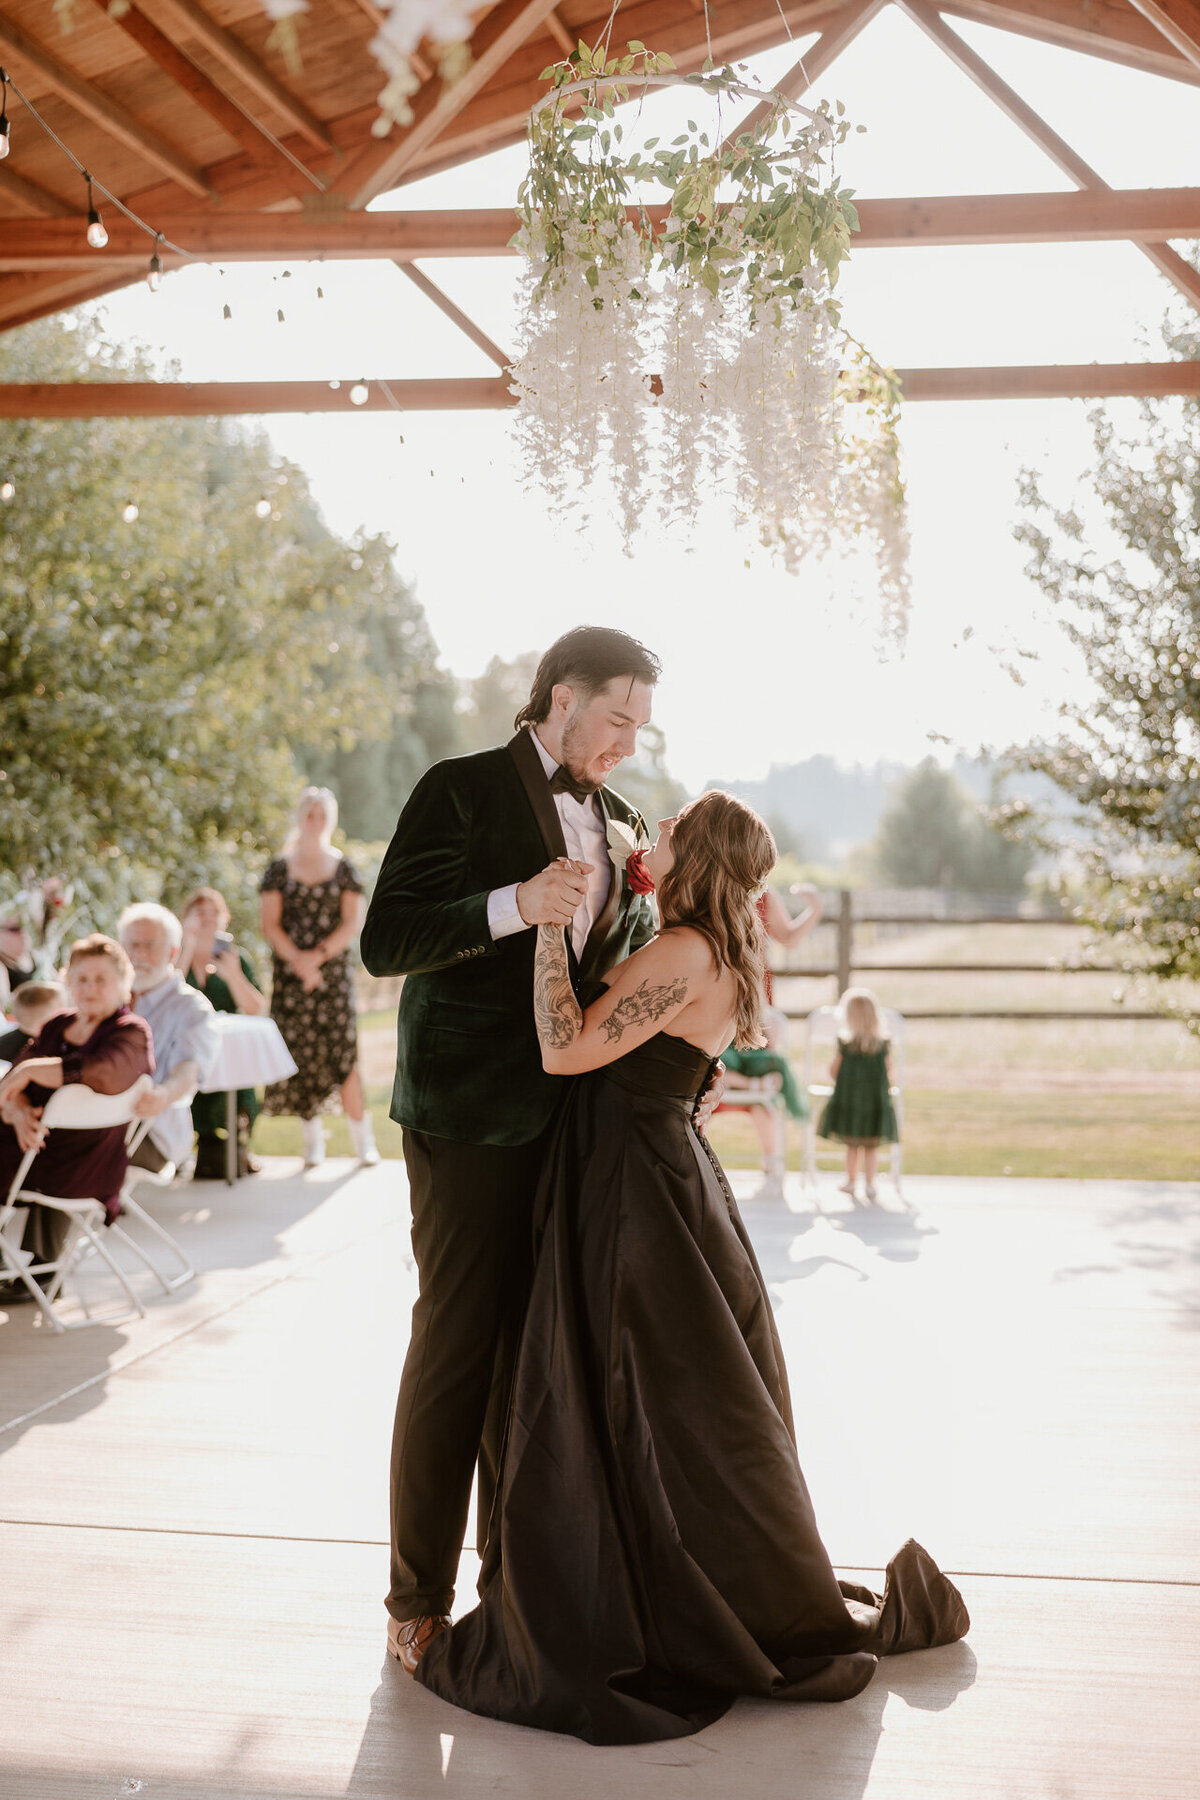 bride and groom's first dance at jacquot vineyards in brush prairie washington